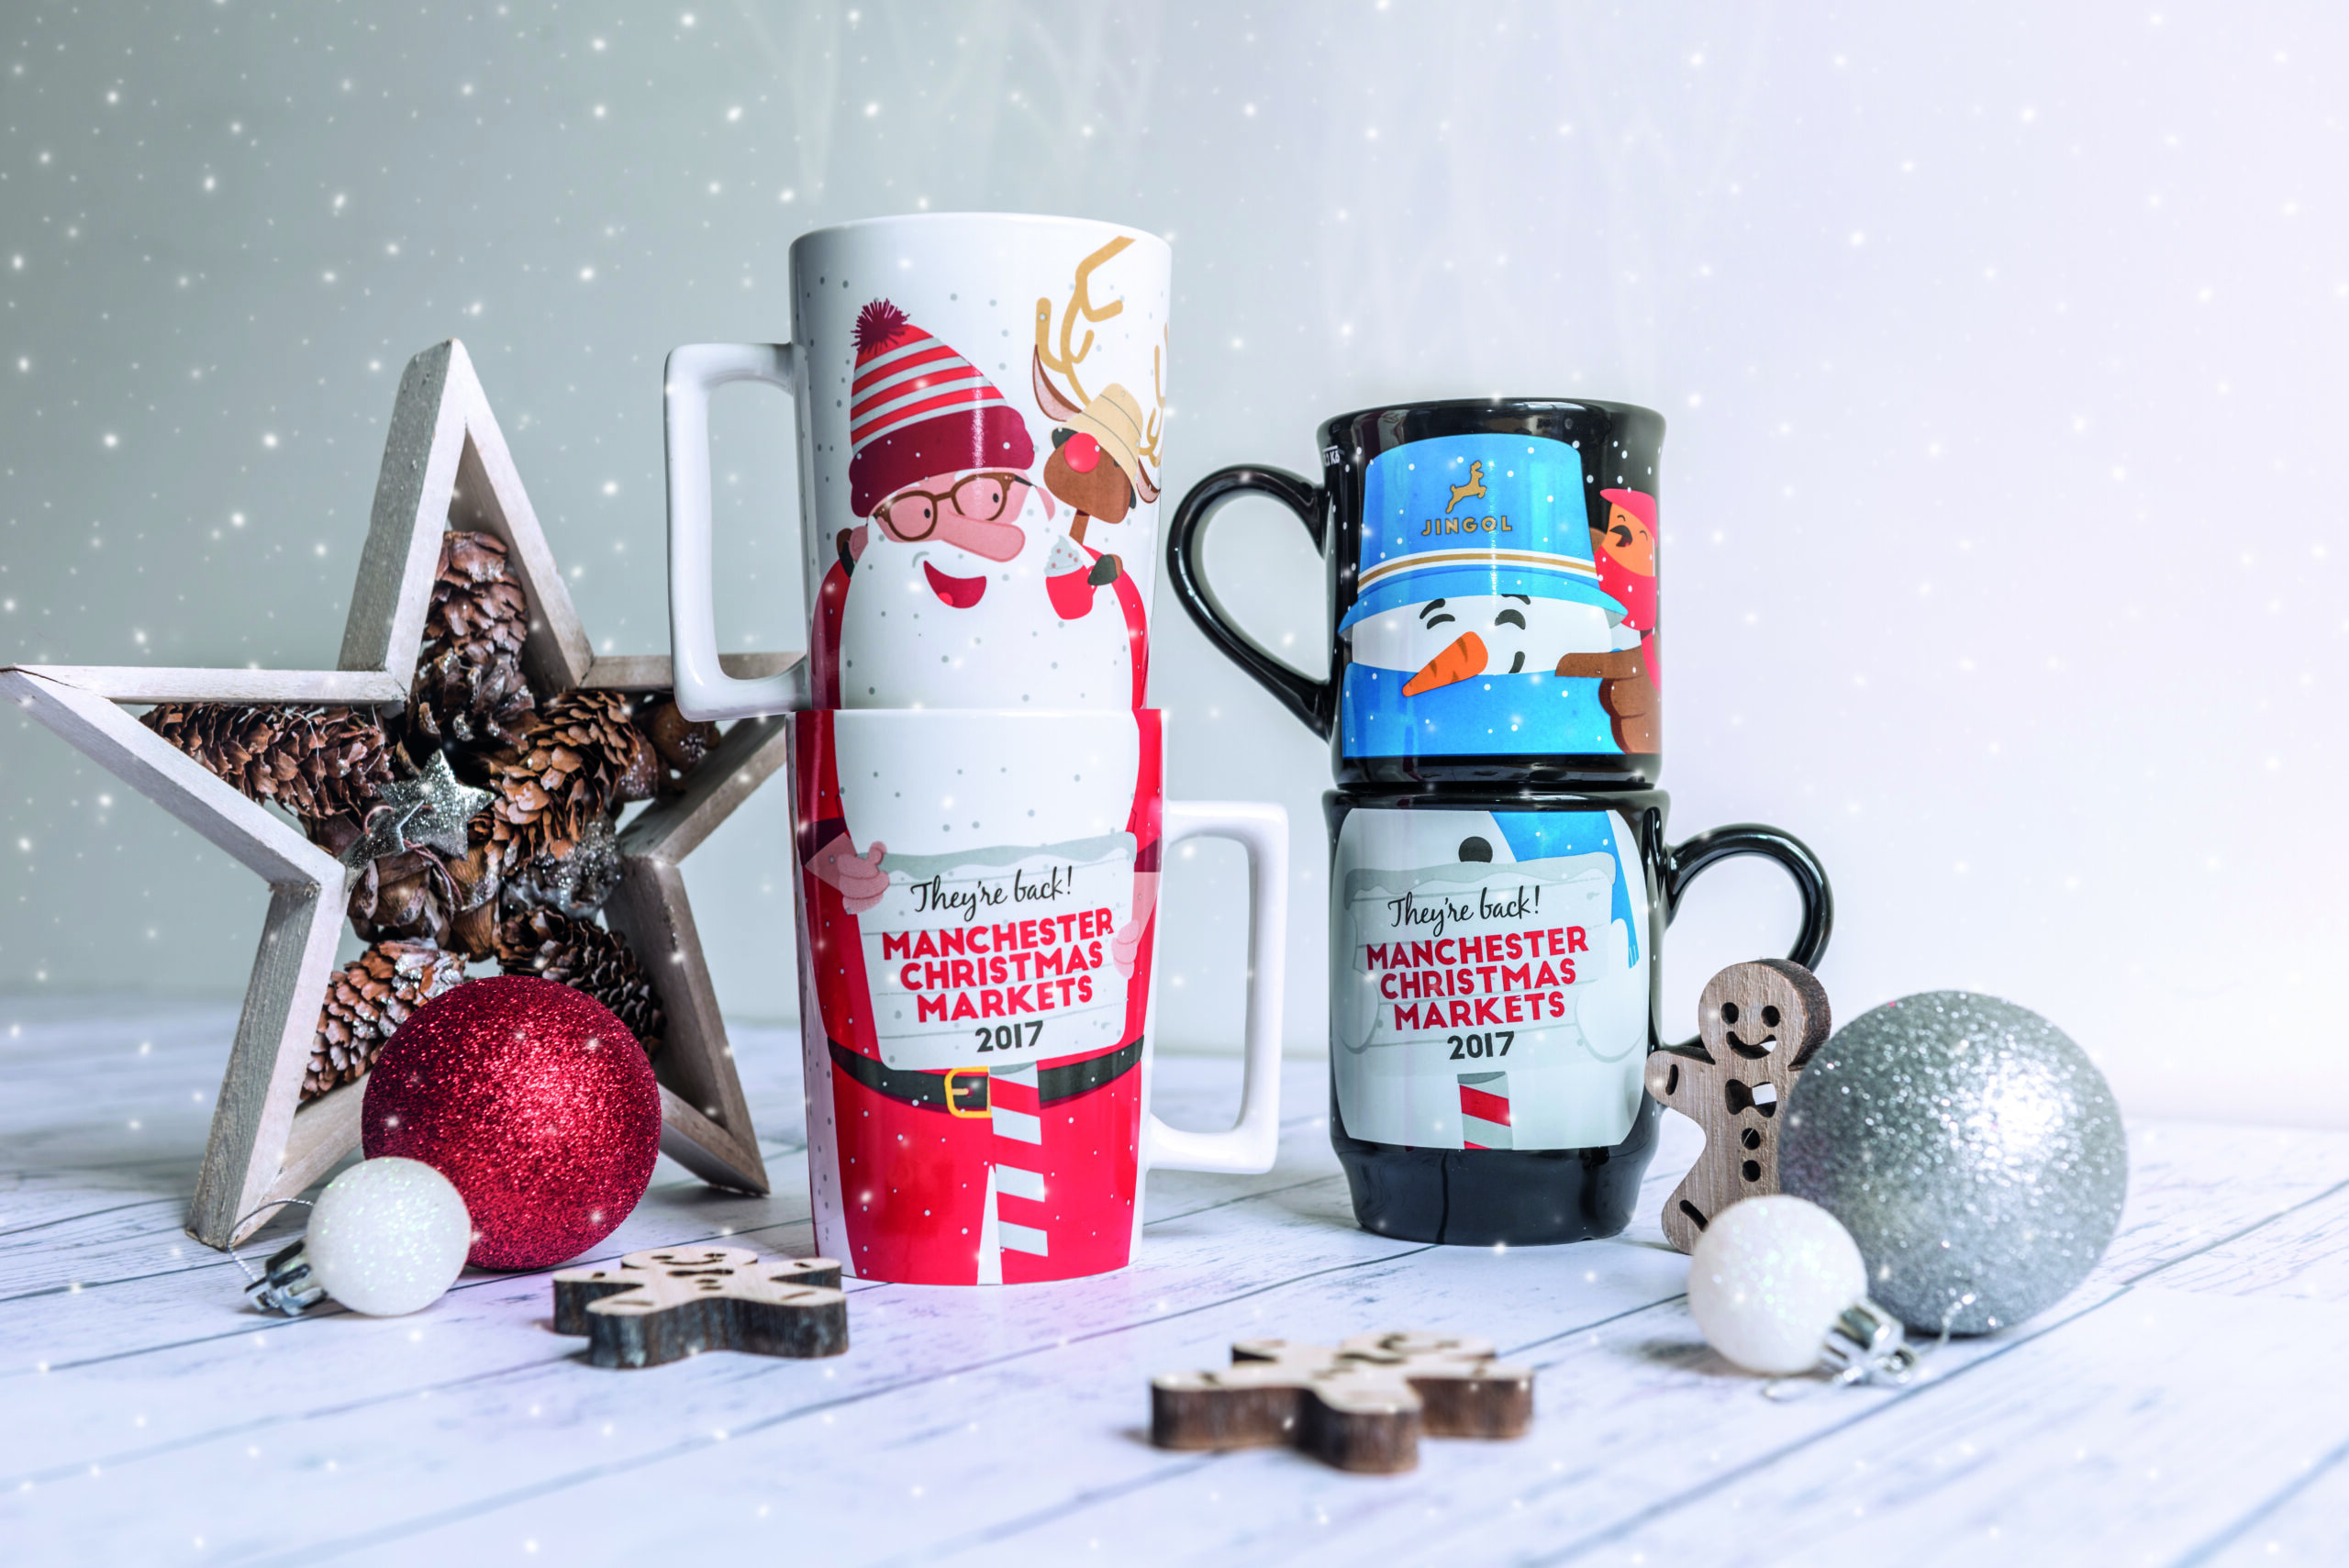 The 2017 Manchester Christmas Markets mugs. Credit: Manchester City Council